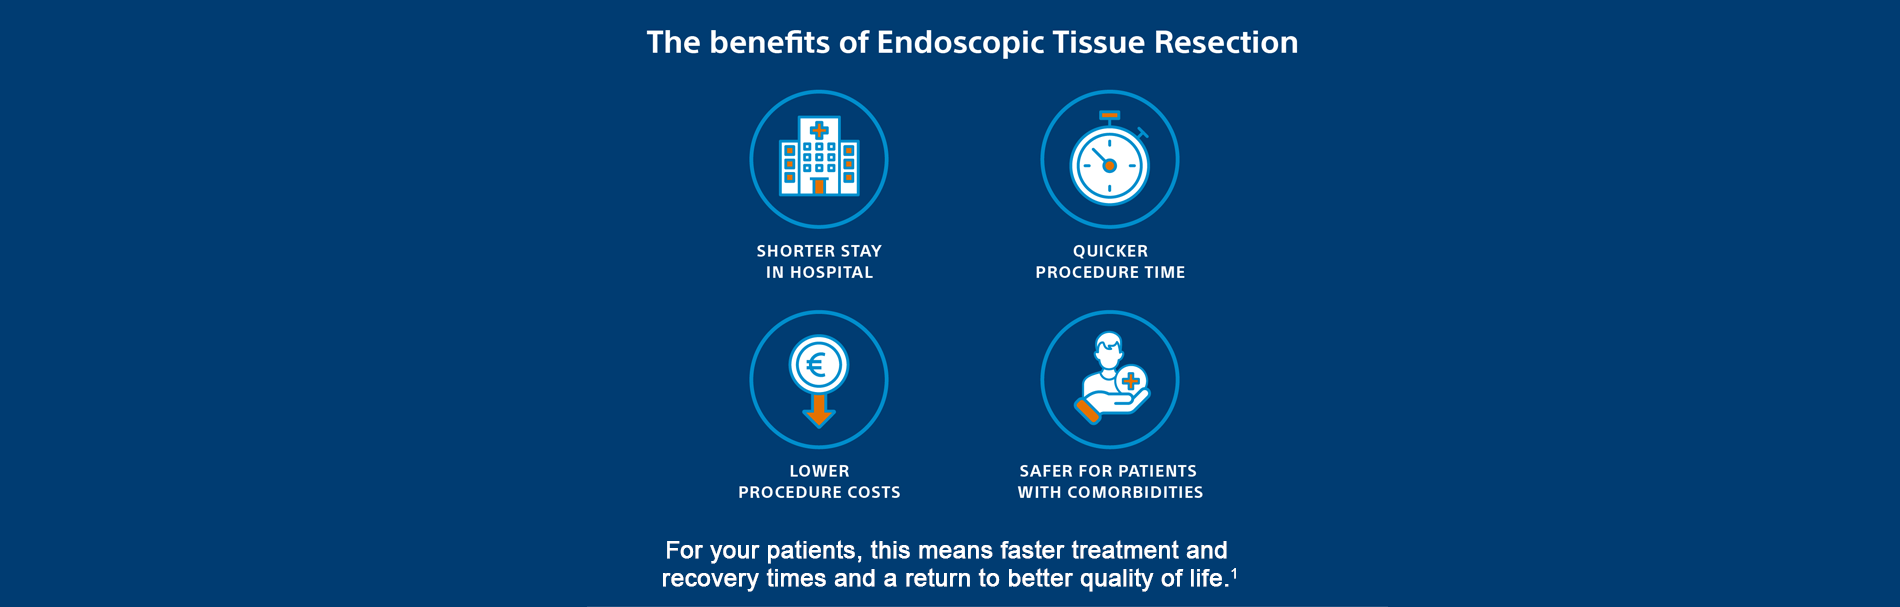 benefits of endoscopic tissue resection